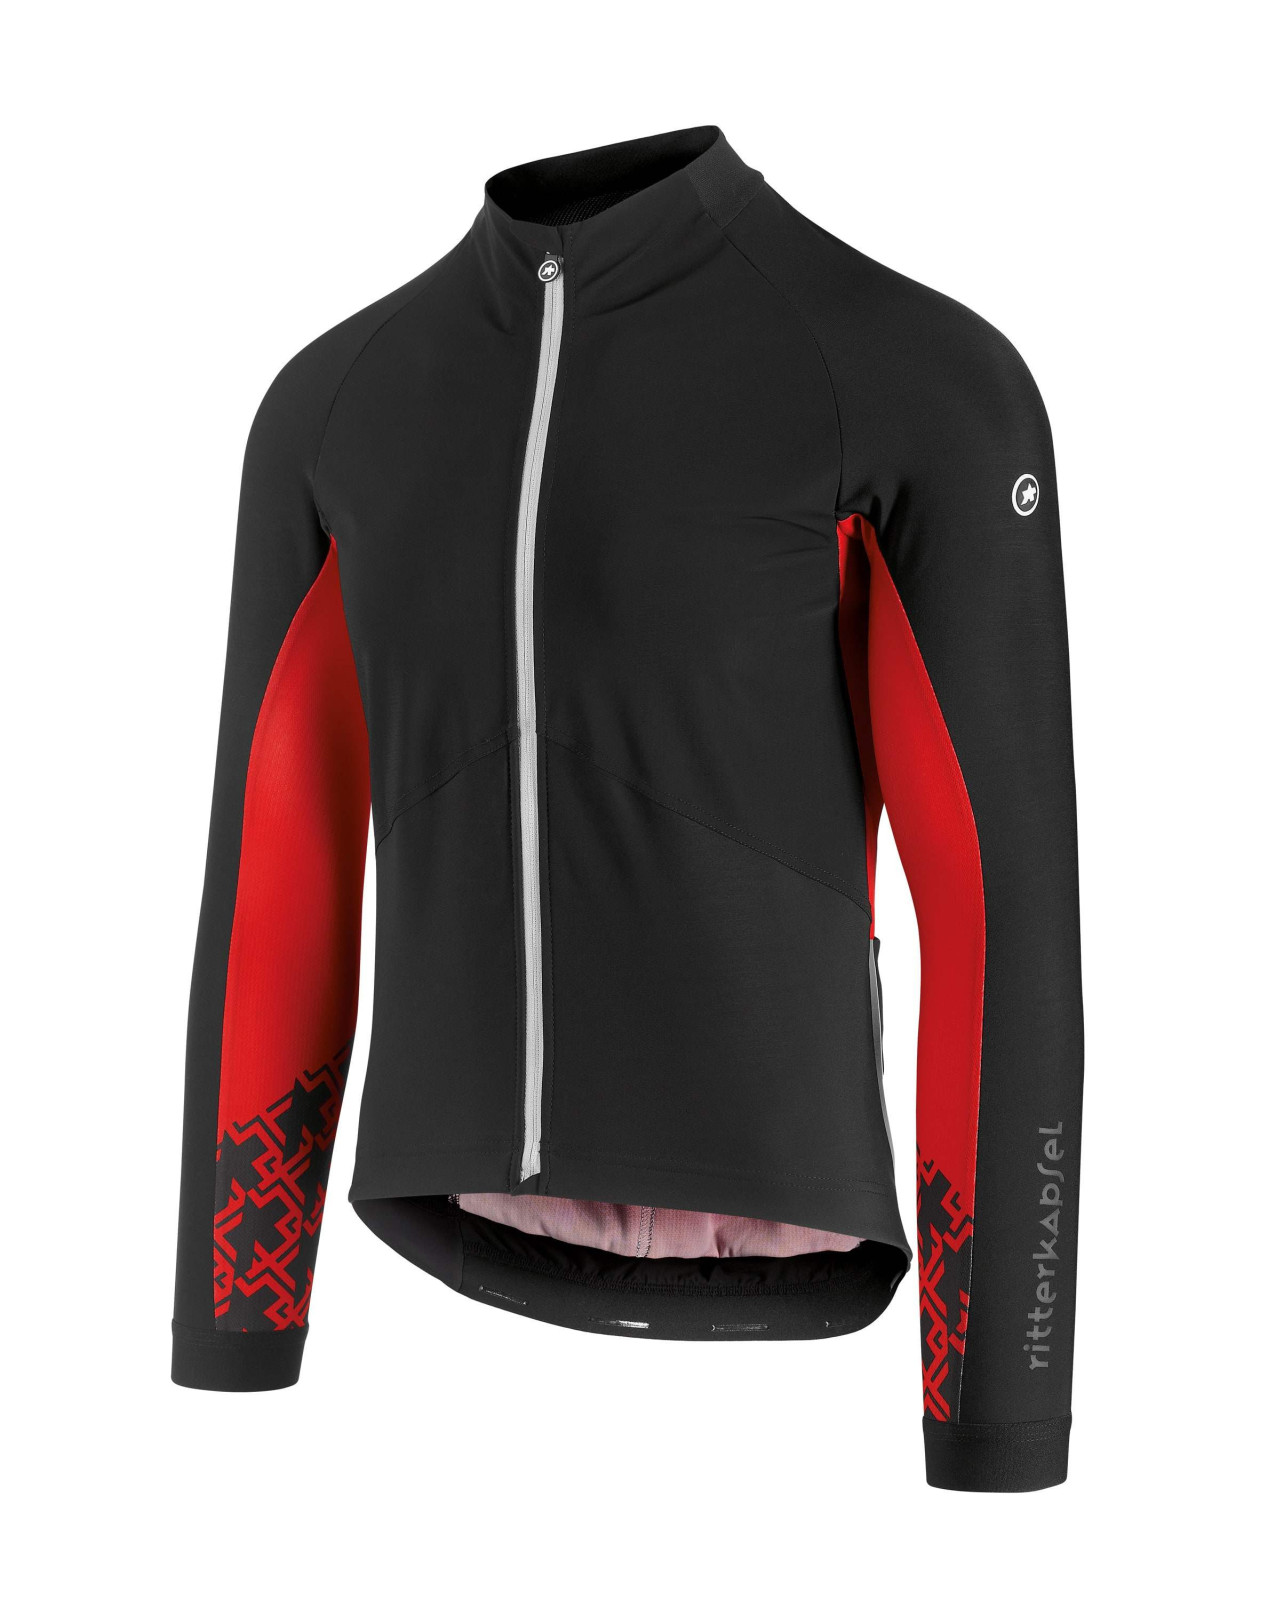 Assos Mille GT Spring Fall Jacket - Jackets - Cycle SuperStore